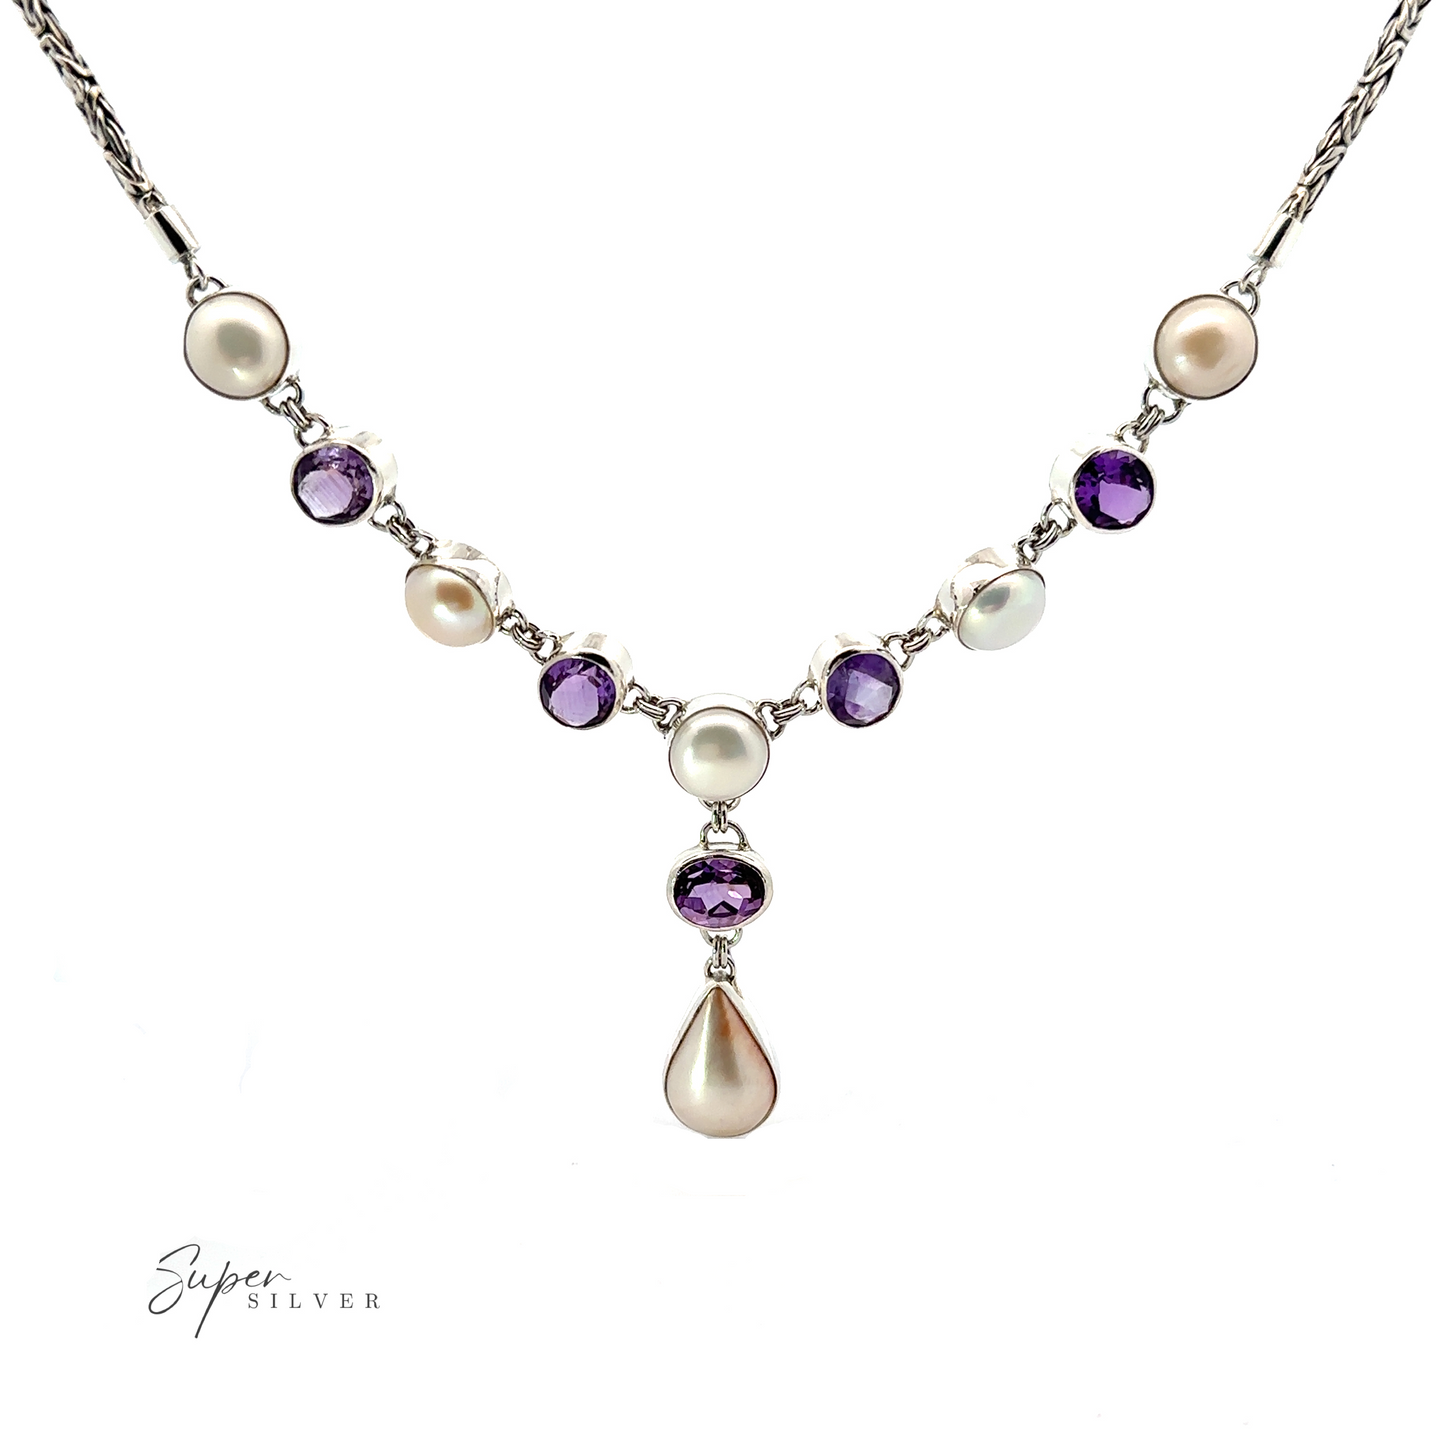 
                  
                    A Stunning Pearl and Gemstone Statement Necklace with alternating purple and white gemstones and pearls, featuring a central teardrop-shaped pearl. The logo "Super Silver" is visible in the bottom left corner.
                  
                